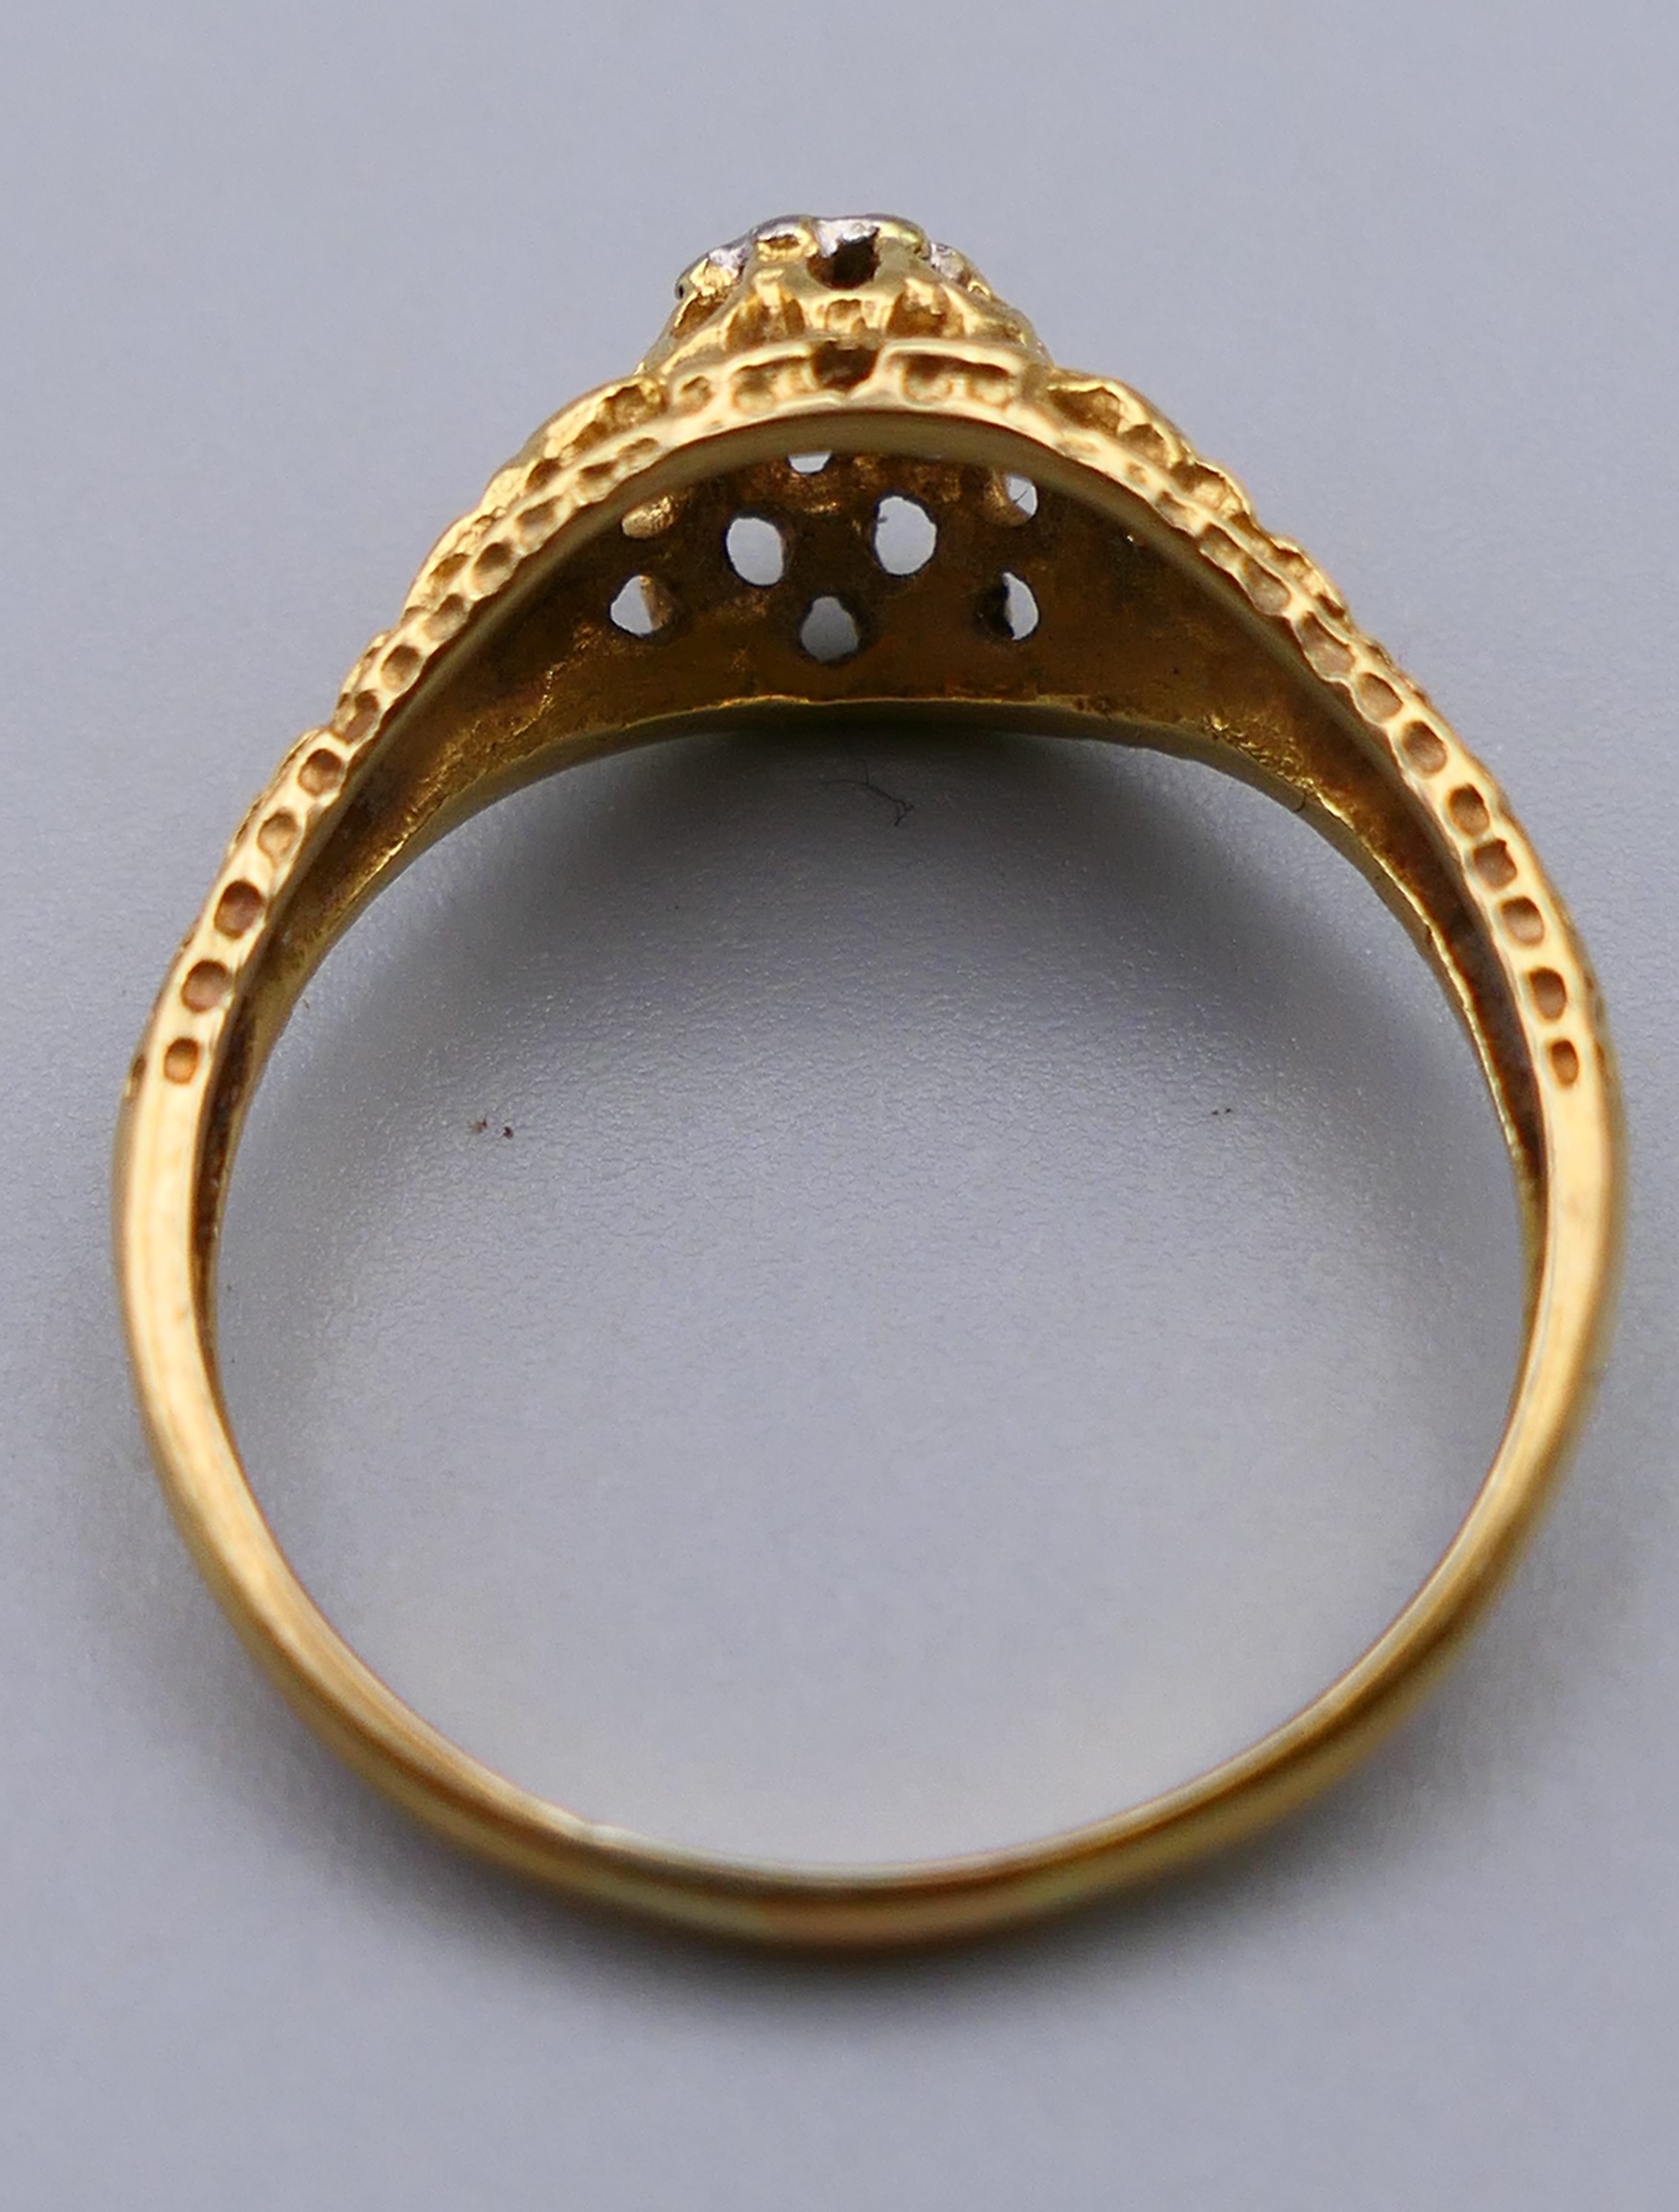 An 18 ct gold and diamond solitaire ring. Ring size Q/R. 3.7 grammes total weight. - Image 3 of 5